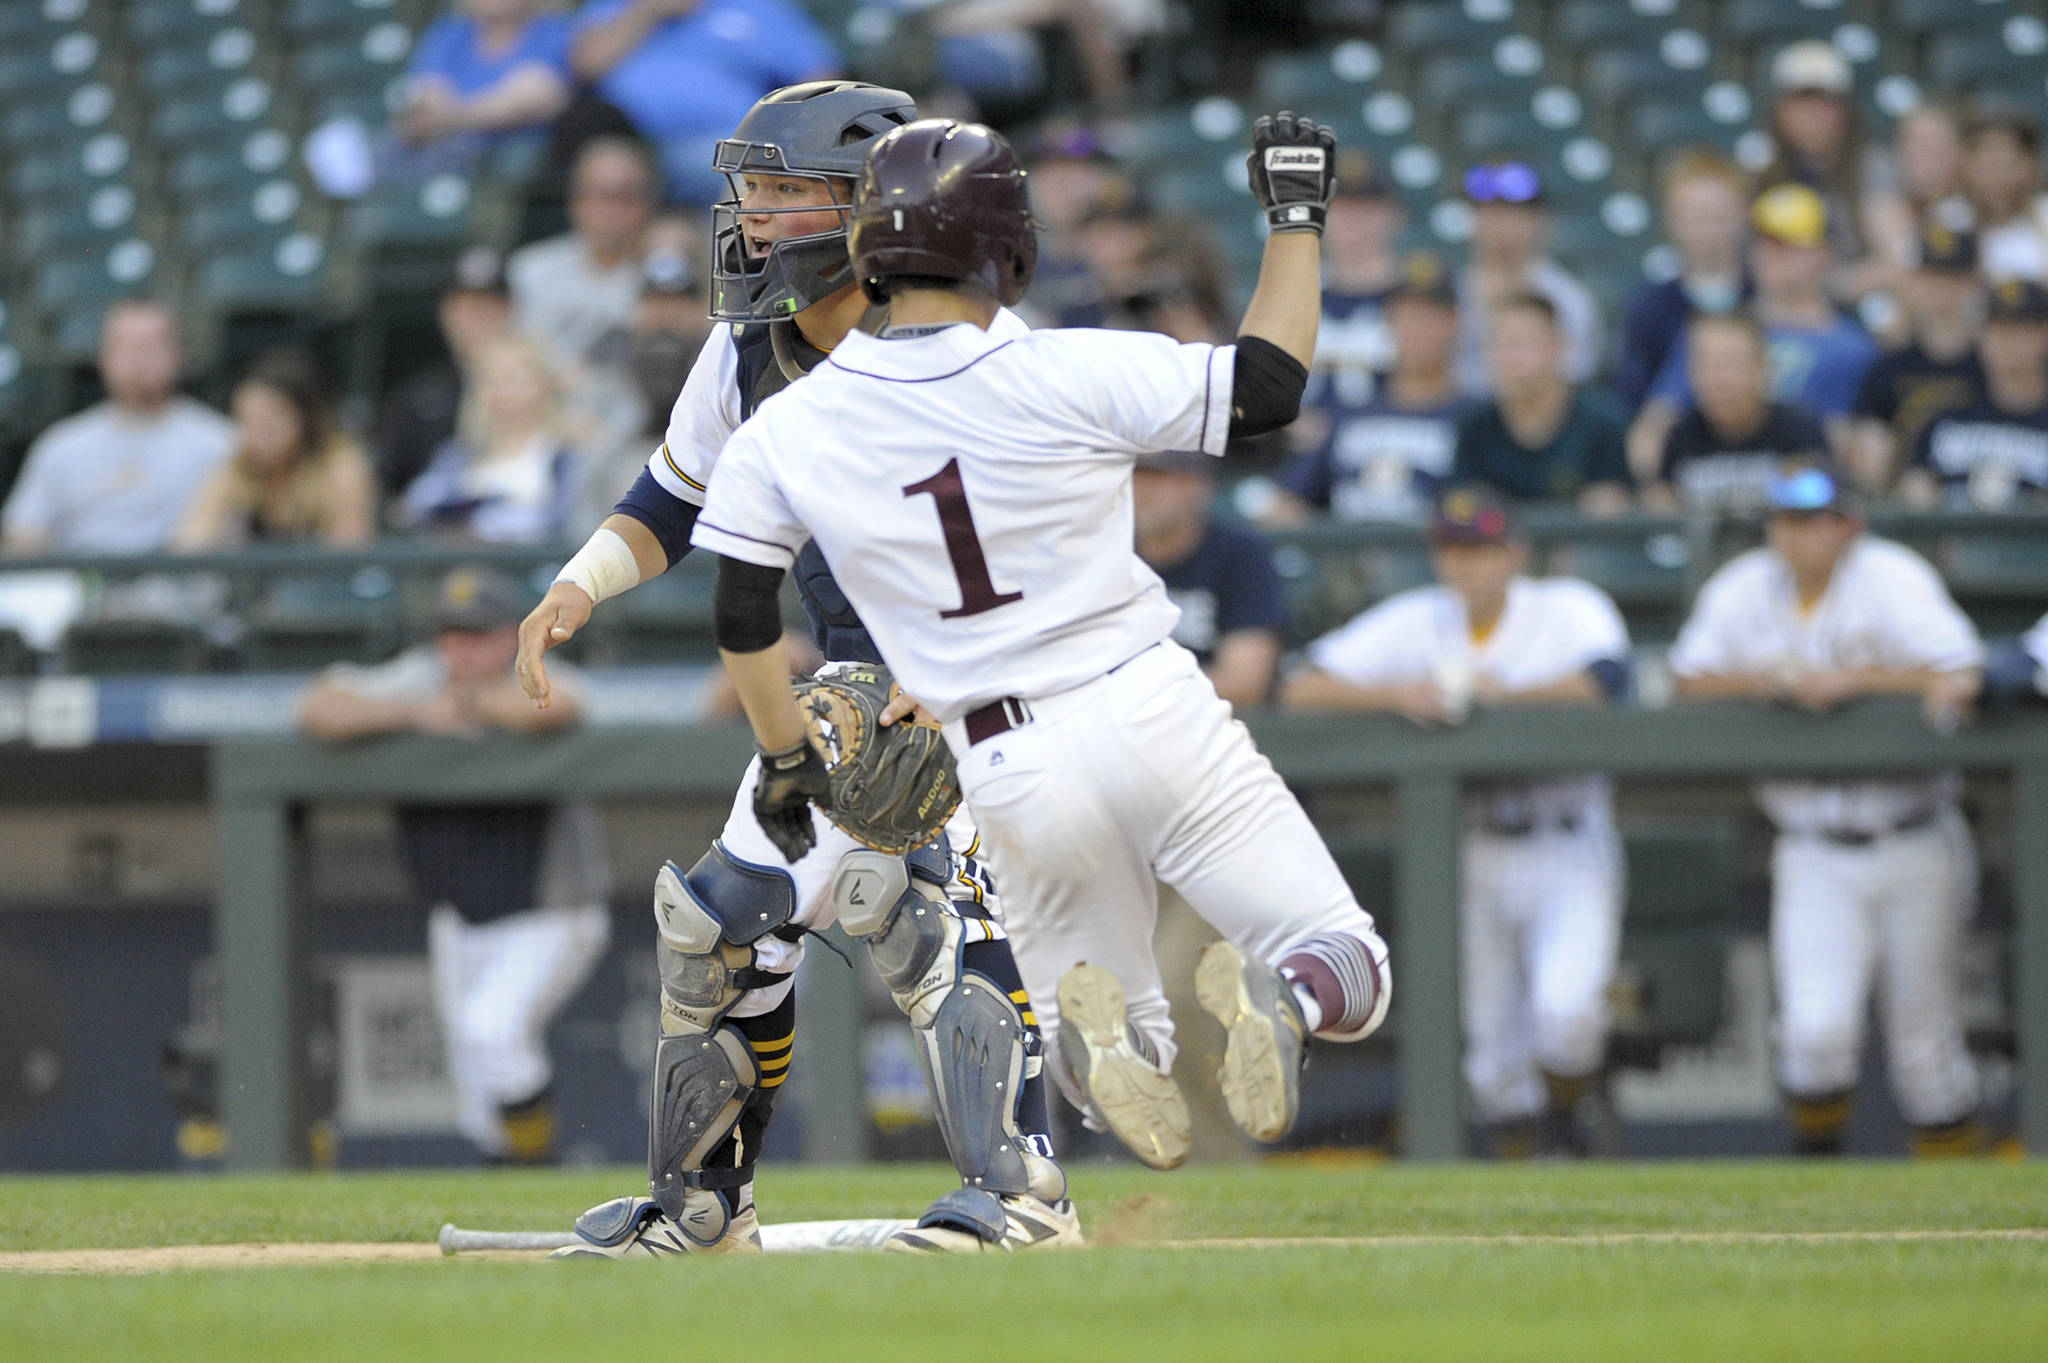 Photo courtesy of Patrick Krohn                                Mercer Island senior Noah Hsue slides into home-plate in the Class 3A state semifinals against the Southridge Suns on May 26 at Safeco Field. Southridge defeated Mercer Island 5-4.